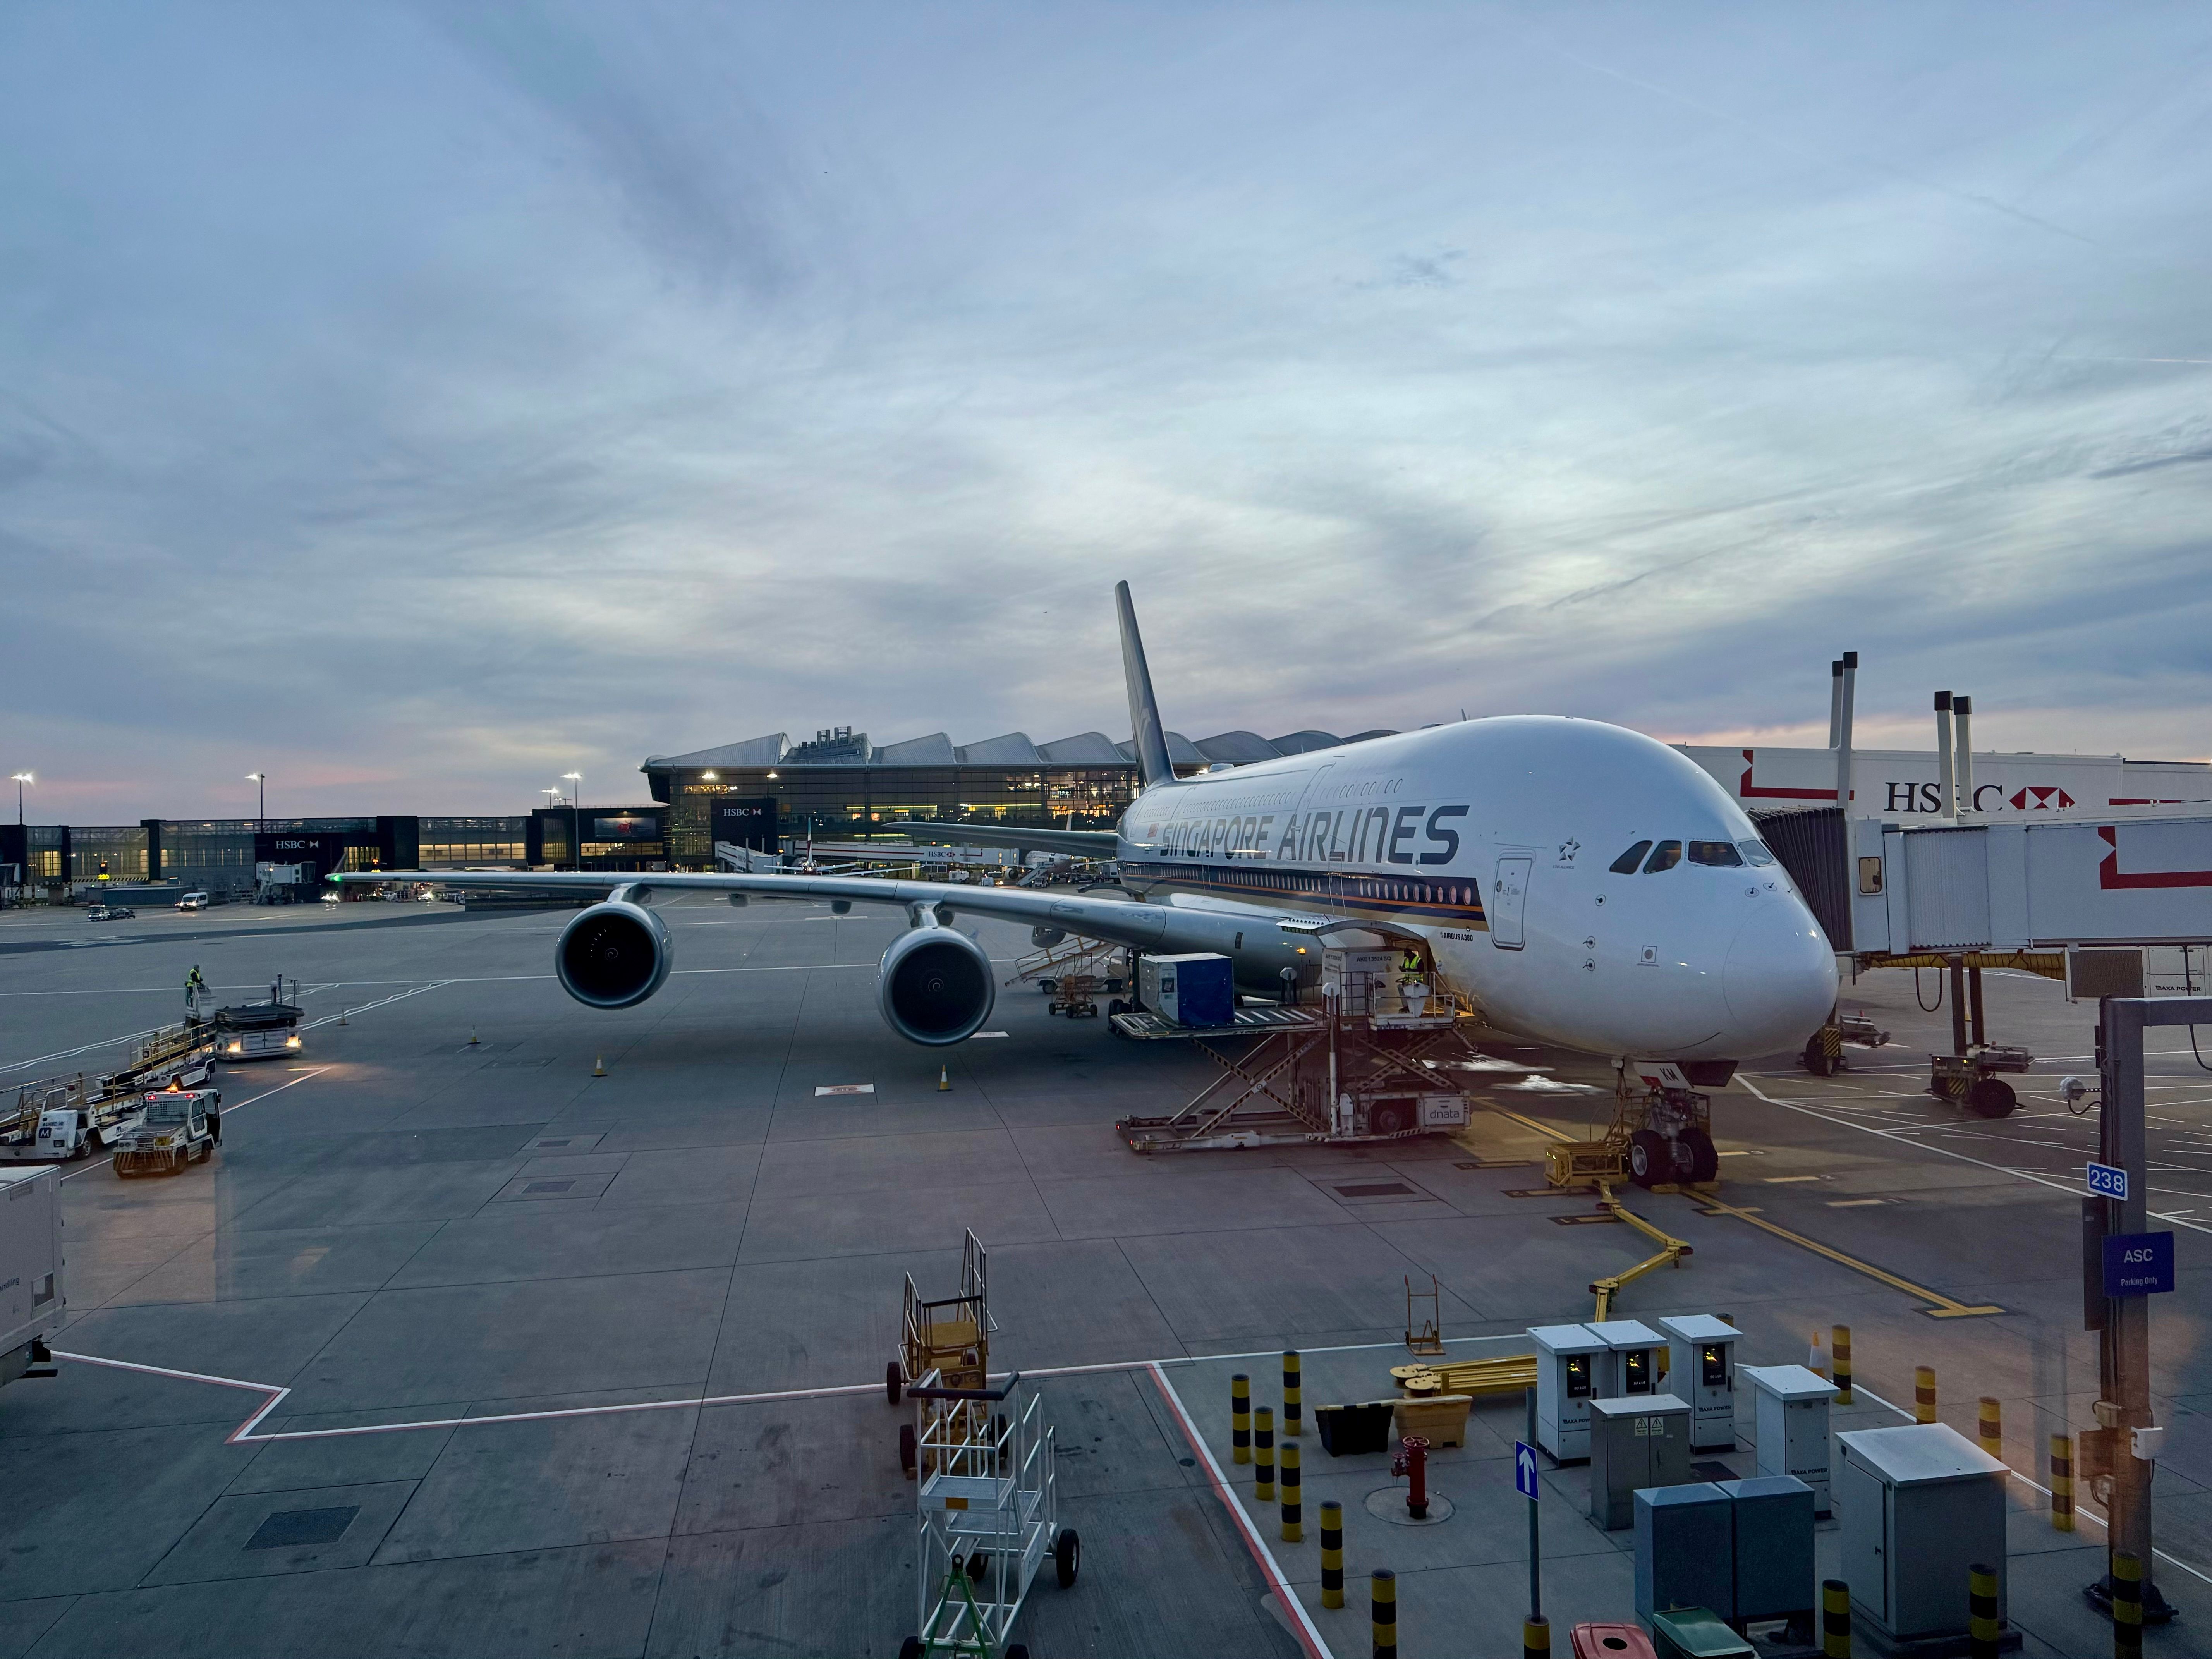 Singapore Airlines Airbus A380 at London Heathrow Airport 